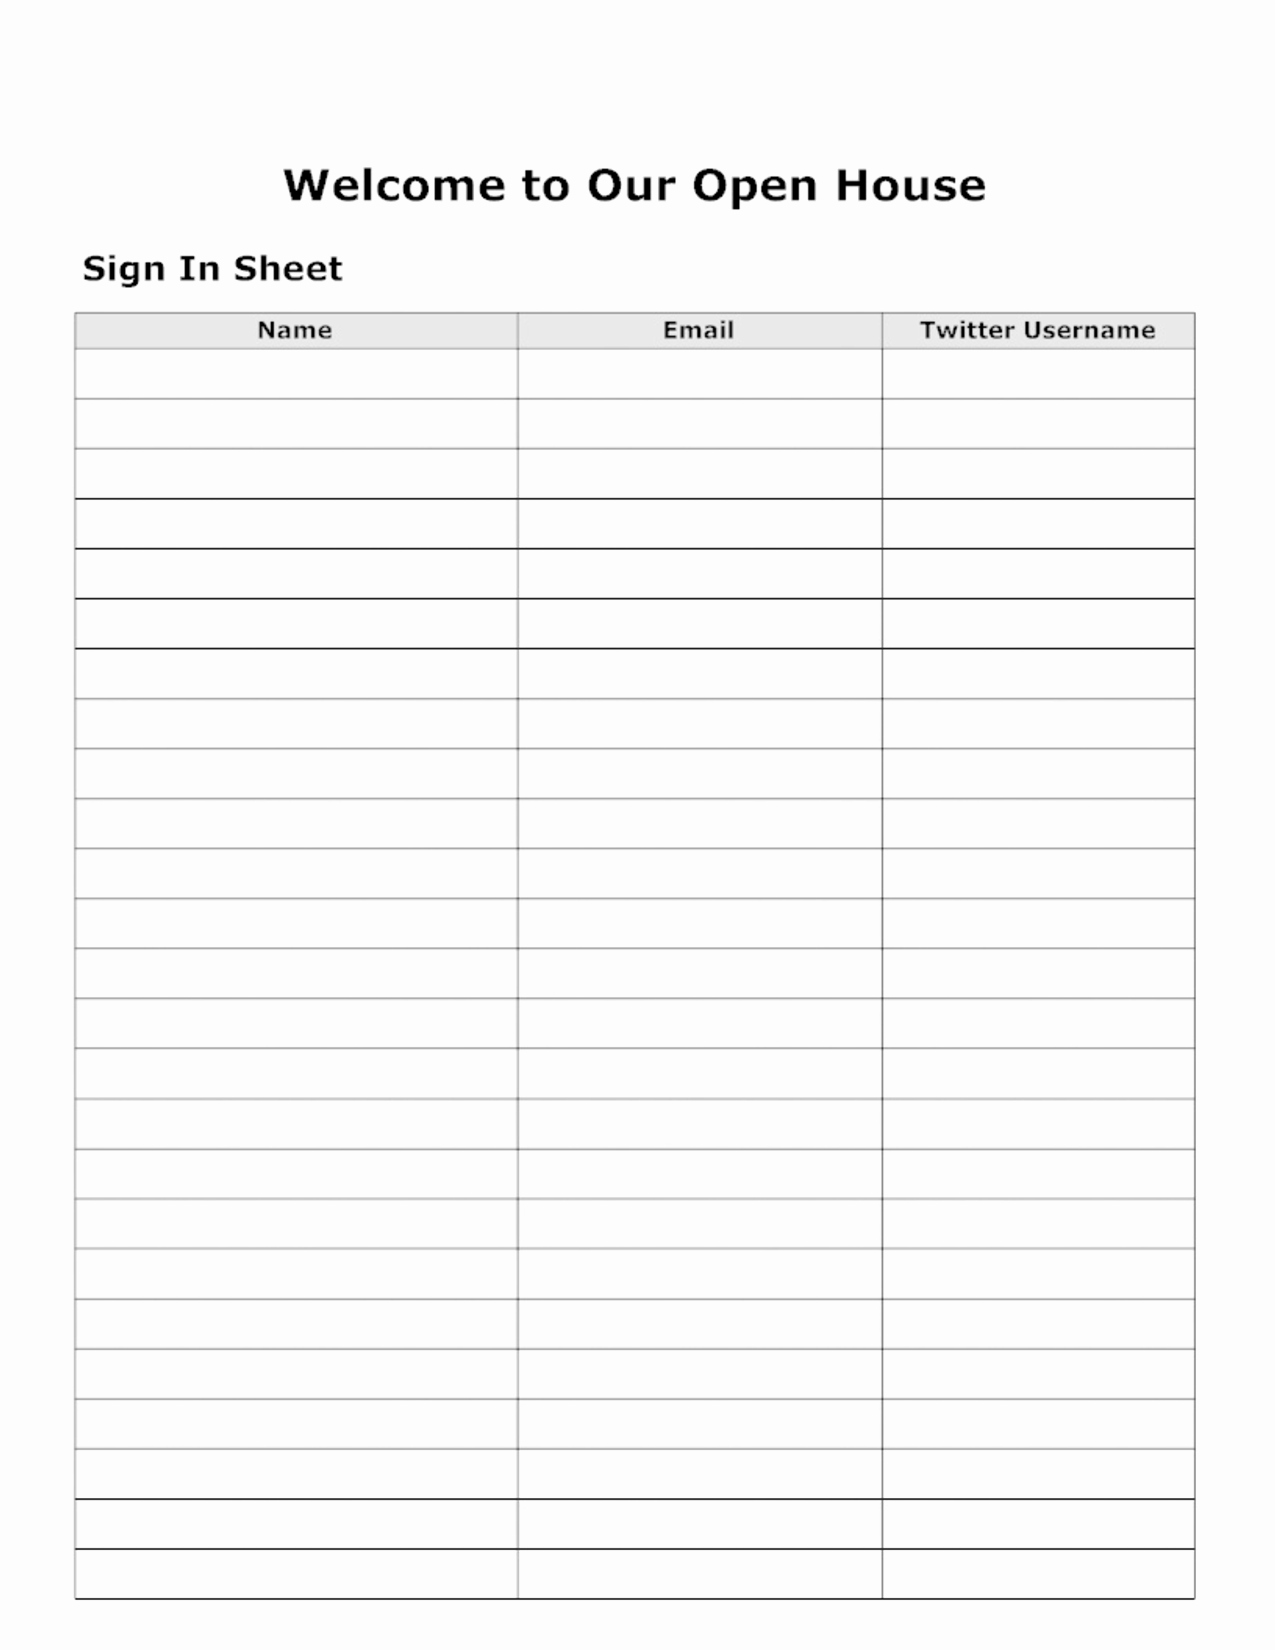 Open House Sign In Sheet Inspirational 30 Sign In Sheet Template Download Open House Meeting &amp; More